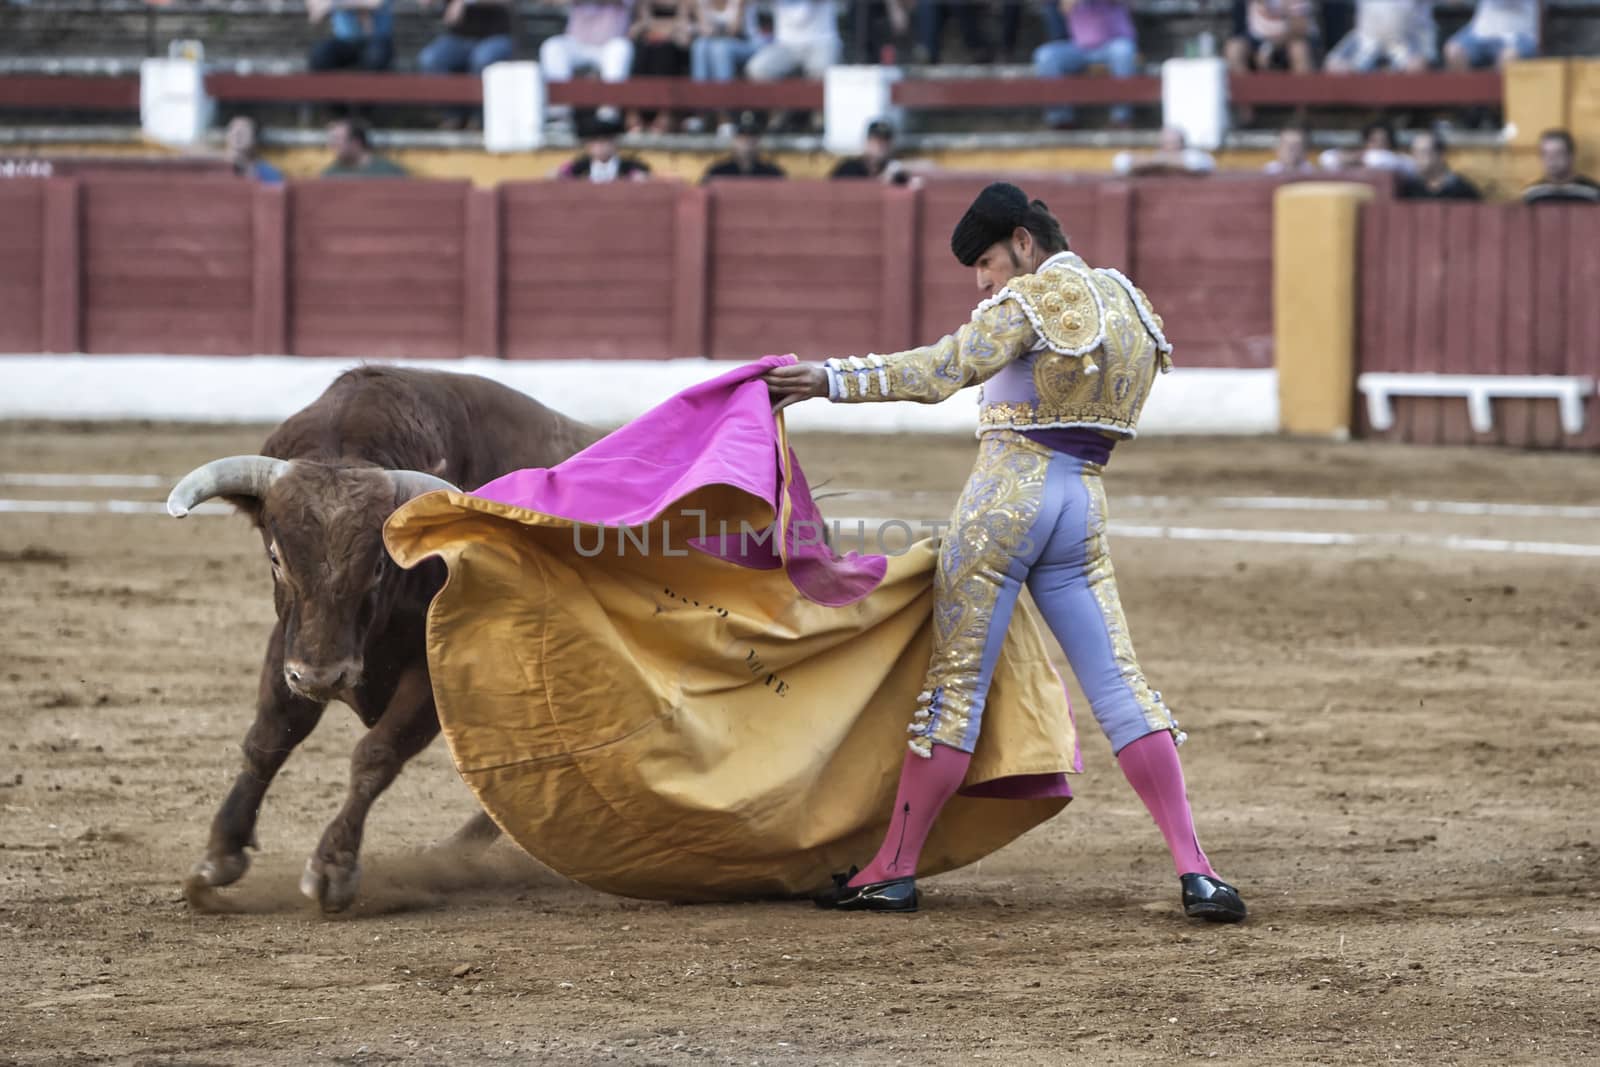 Andujar, Jaen province, SPAIN - 10 september 2011: Spainish bullfighter David Valente bullfighting with a crutch in a beautiful pass by low in the Bullring of Andujar, Jaen province, Andalusia, Spain